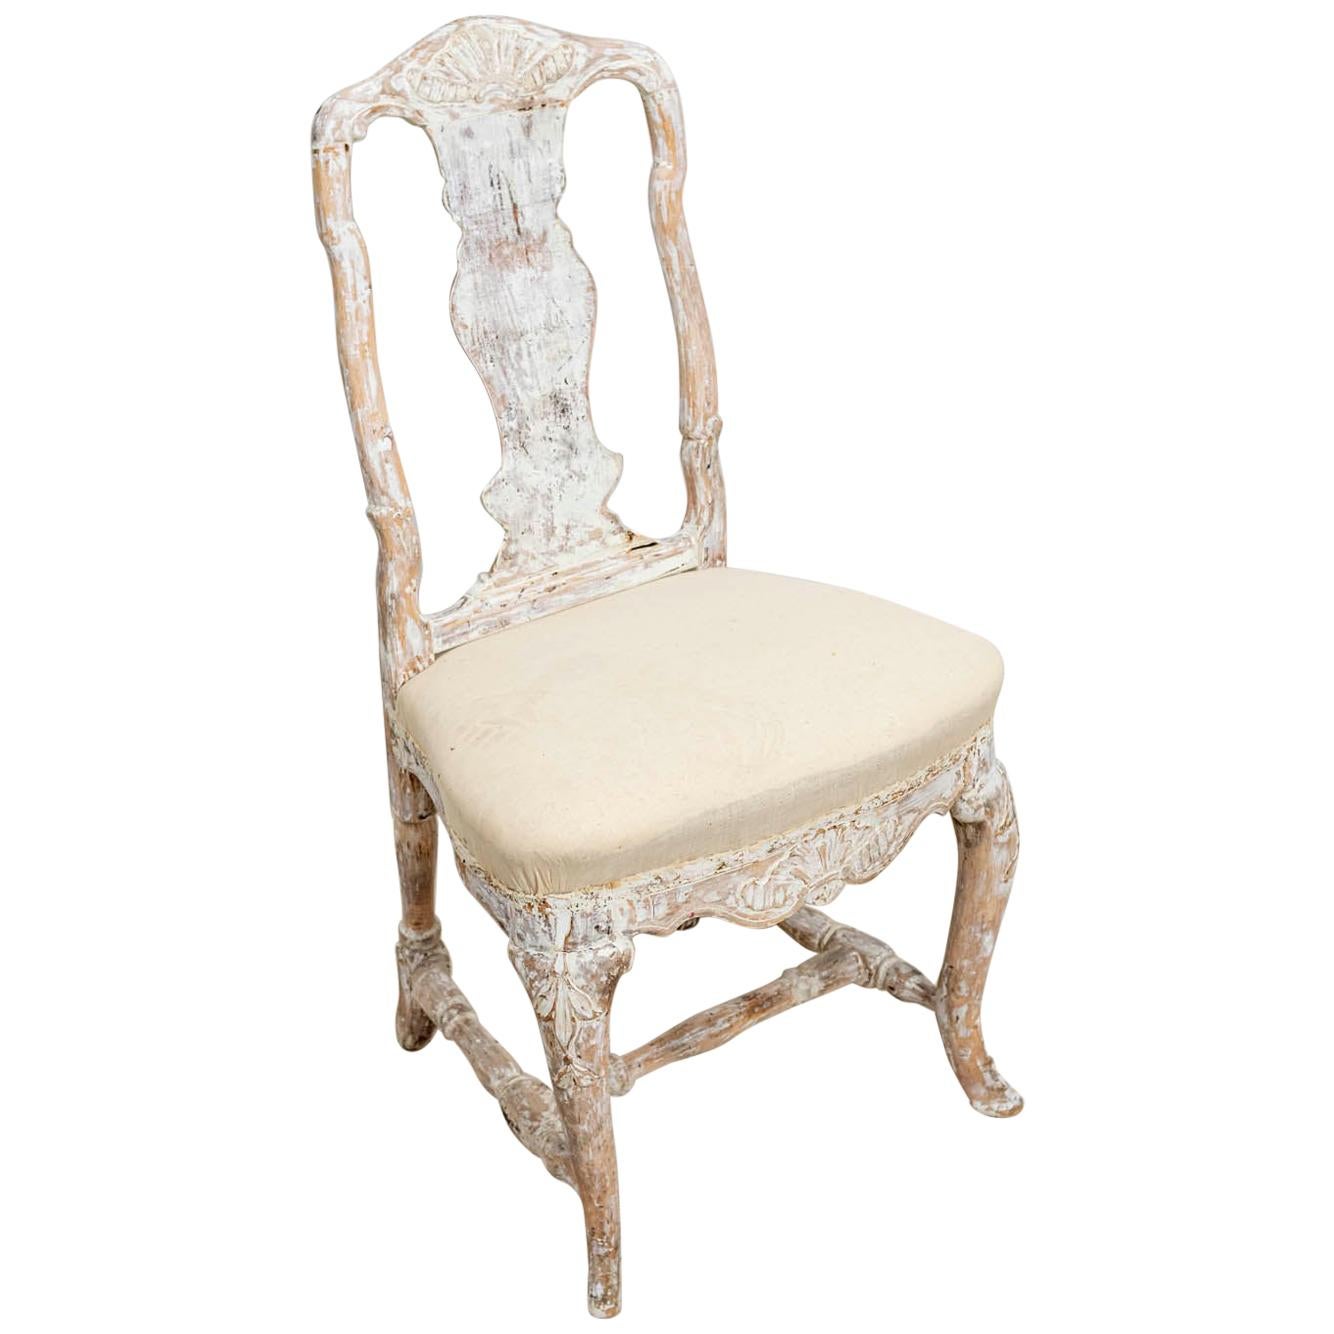 Swedish Rococo Original Painted Carved Shell Detailed Chair, circa 18th Century For Sale